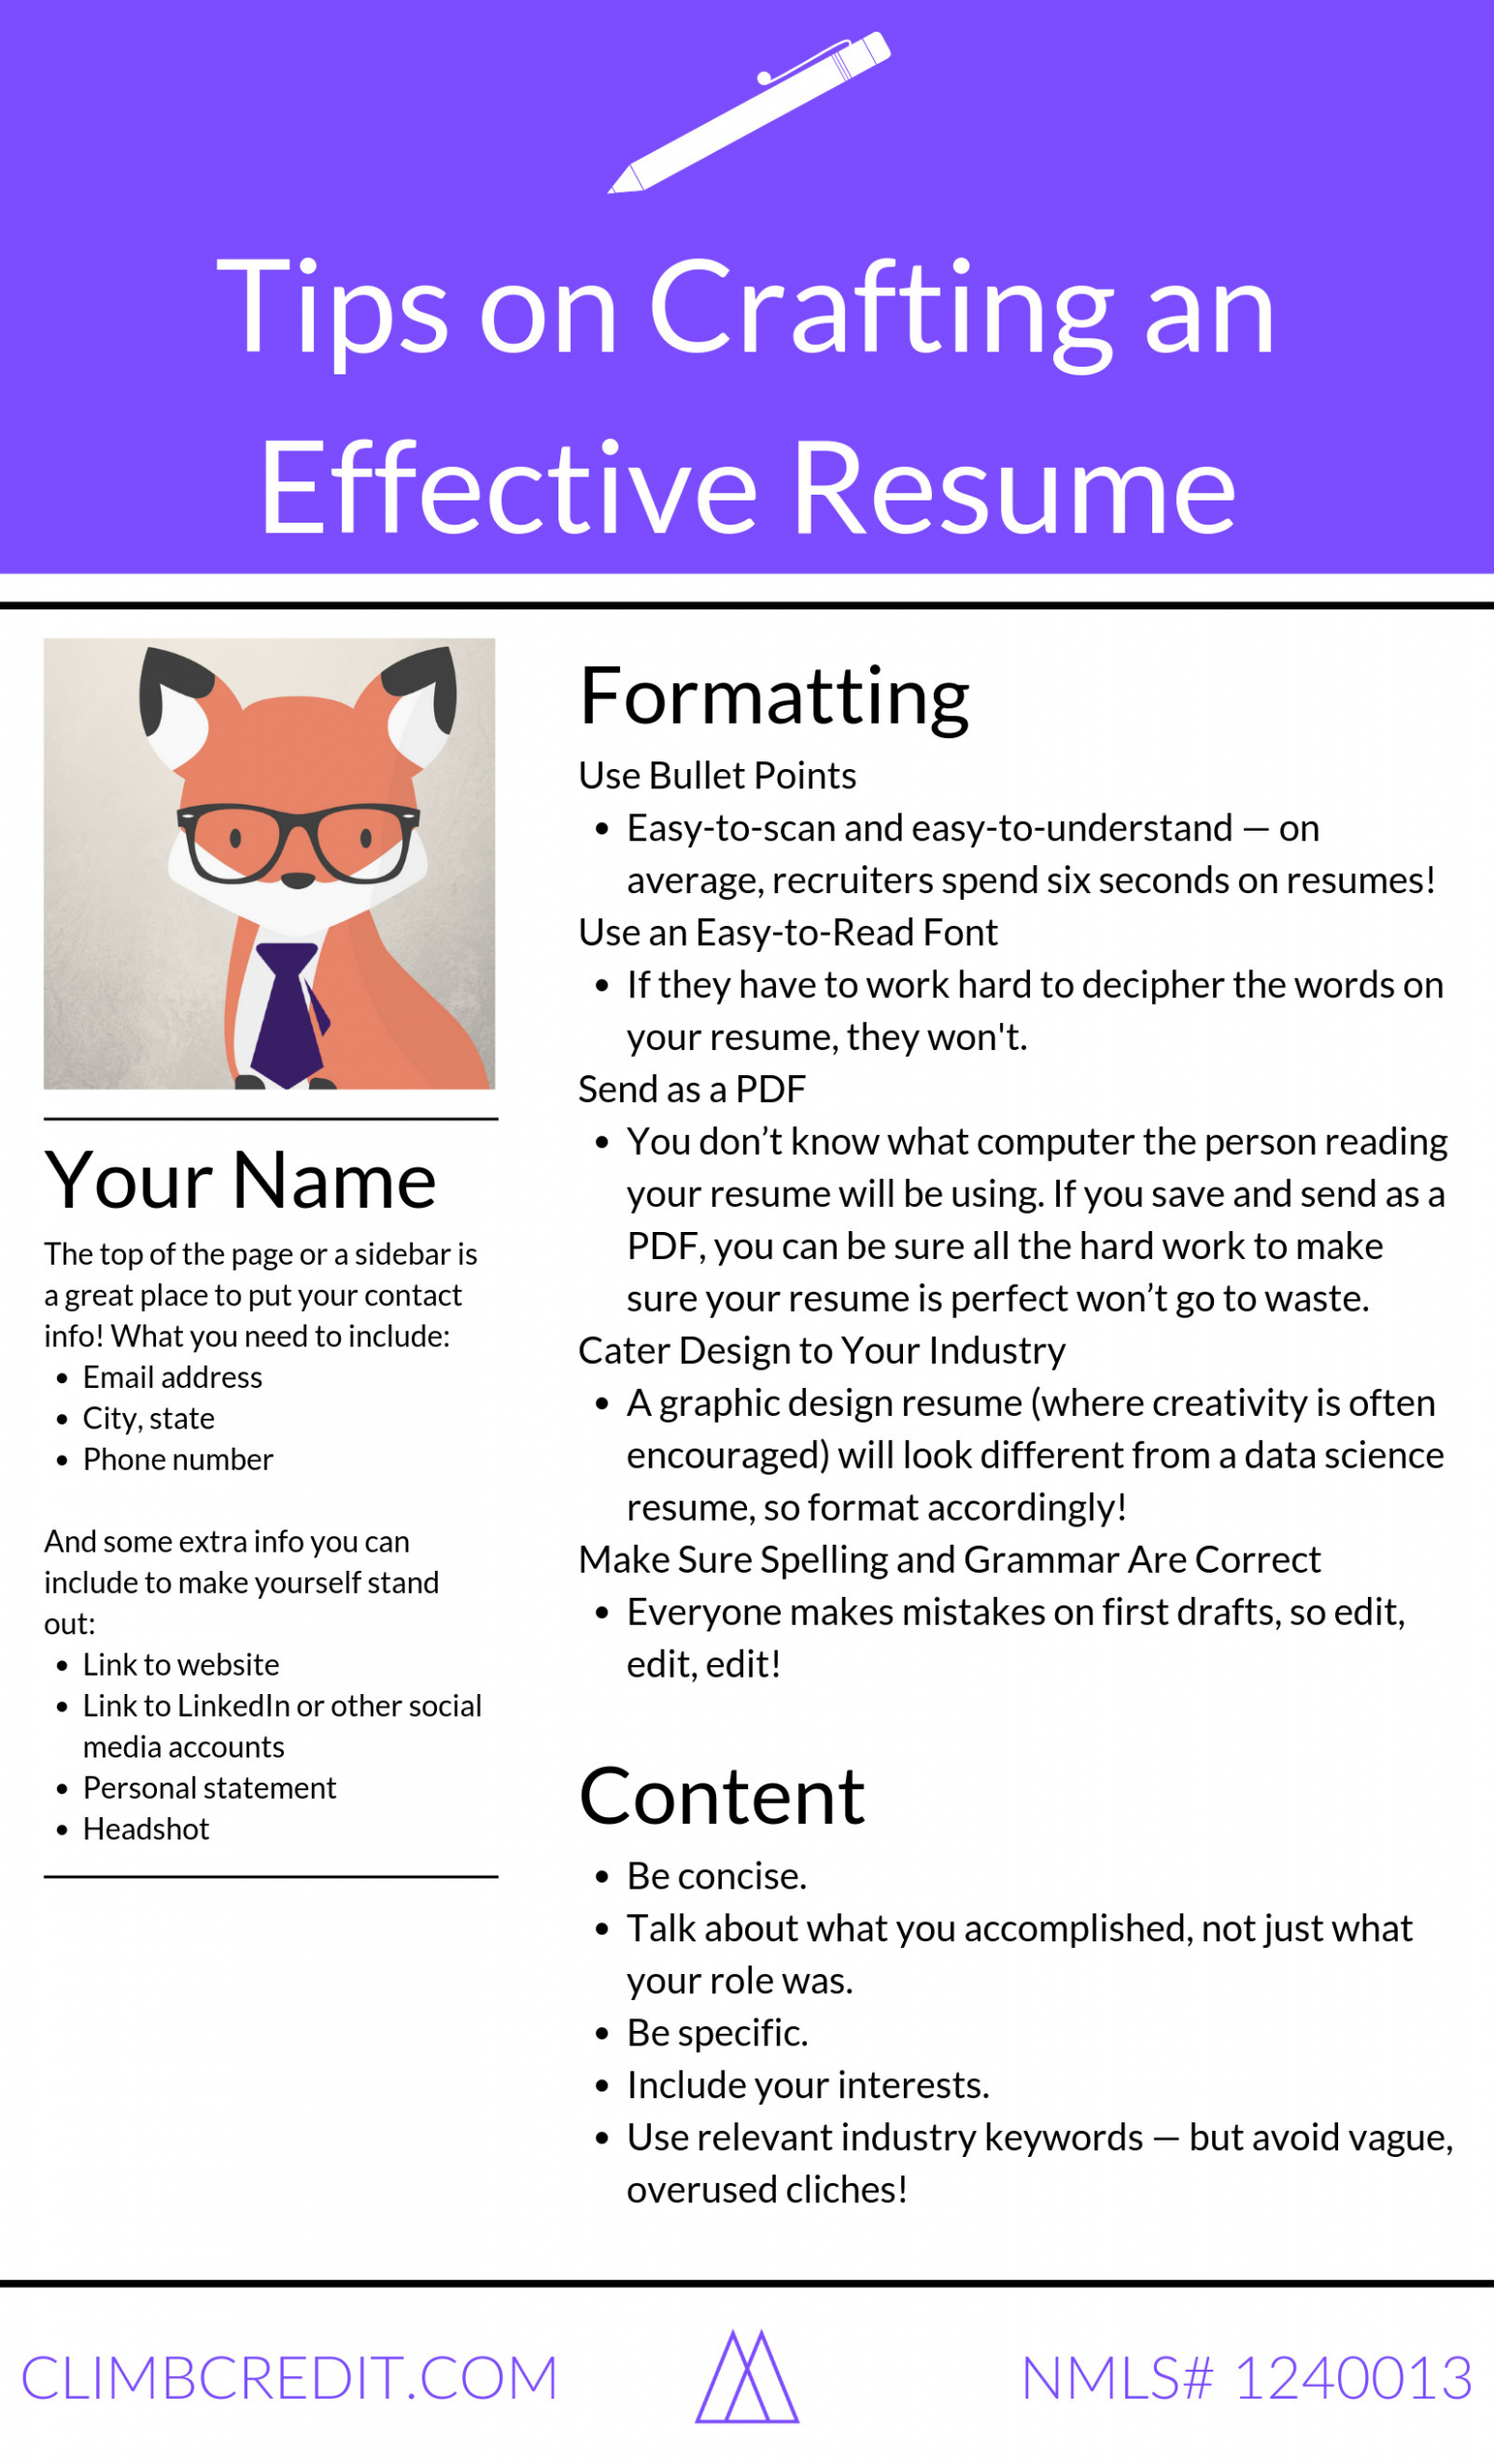 Sample Resumes that Will Get You Hired Job Resume Tips to Help You Hired From How You Should